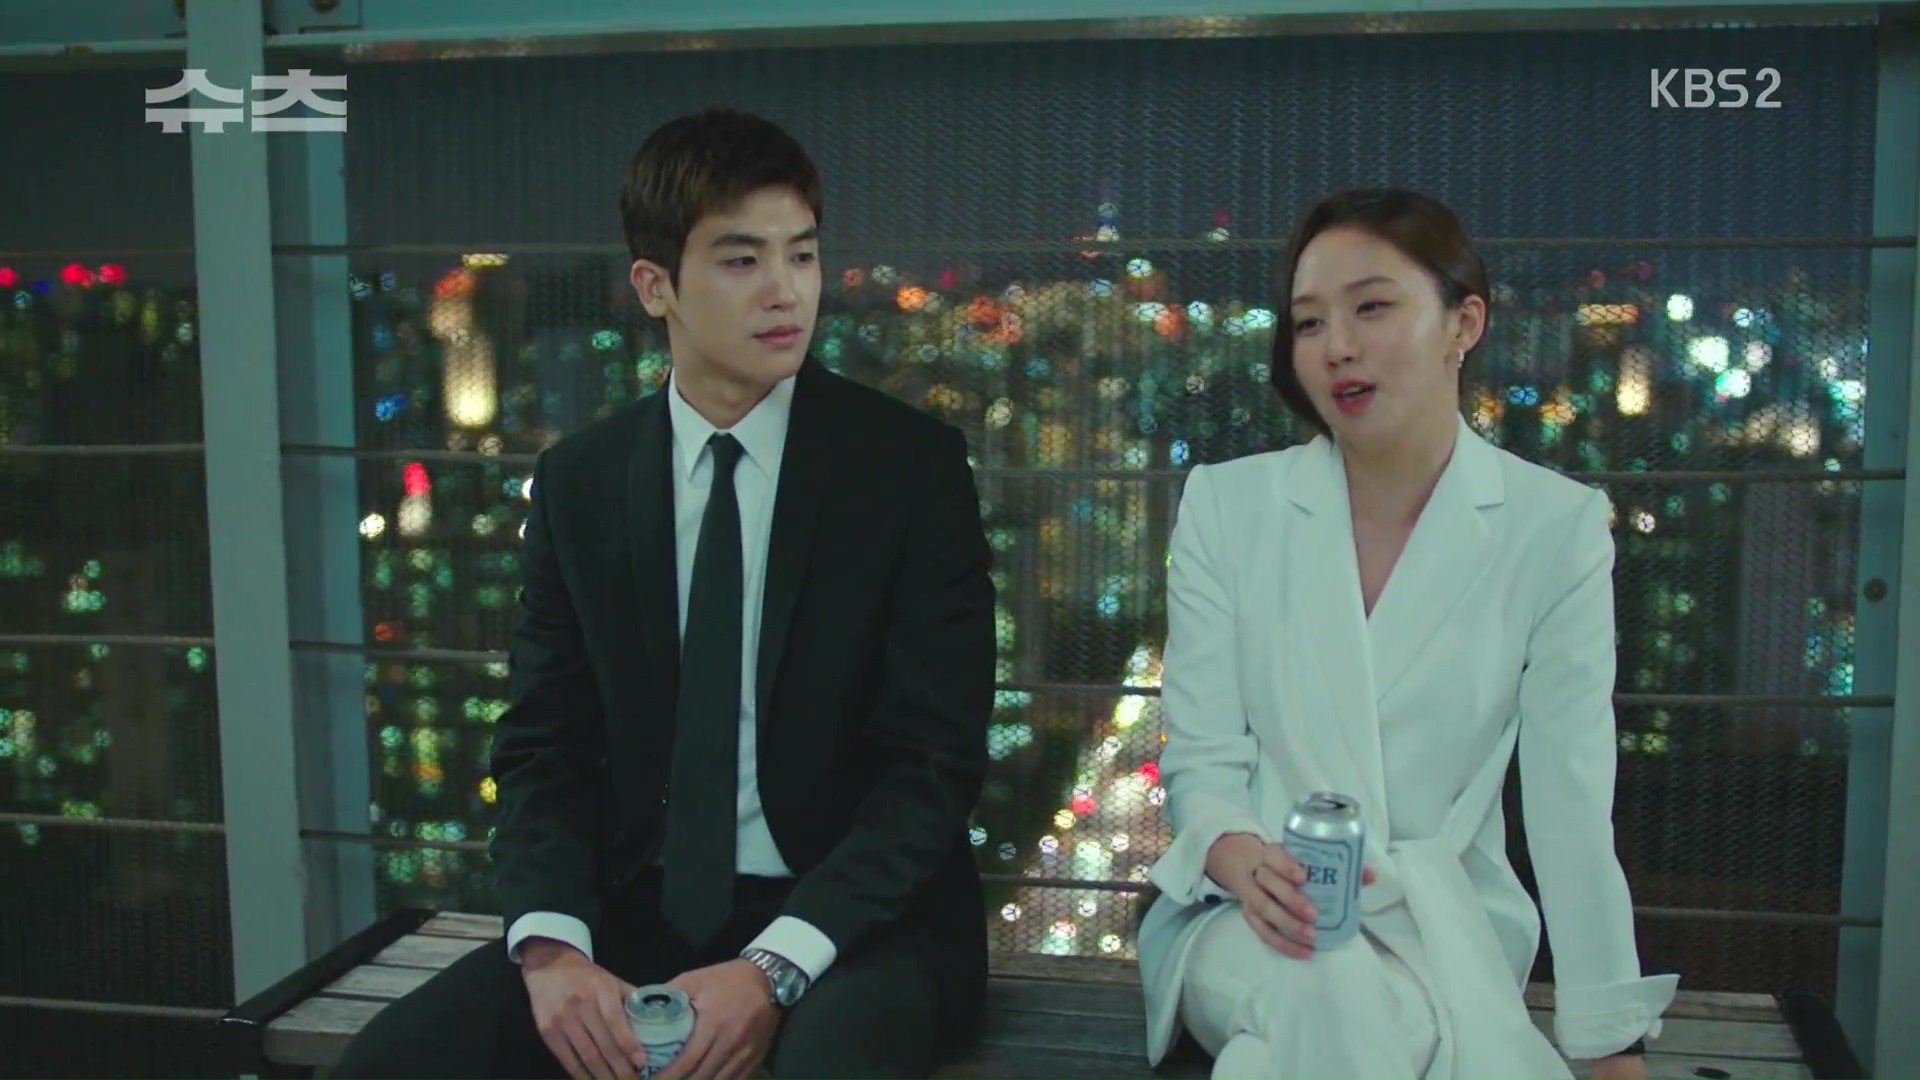 Kdrama suits